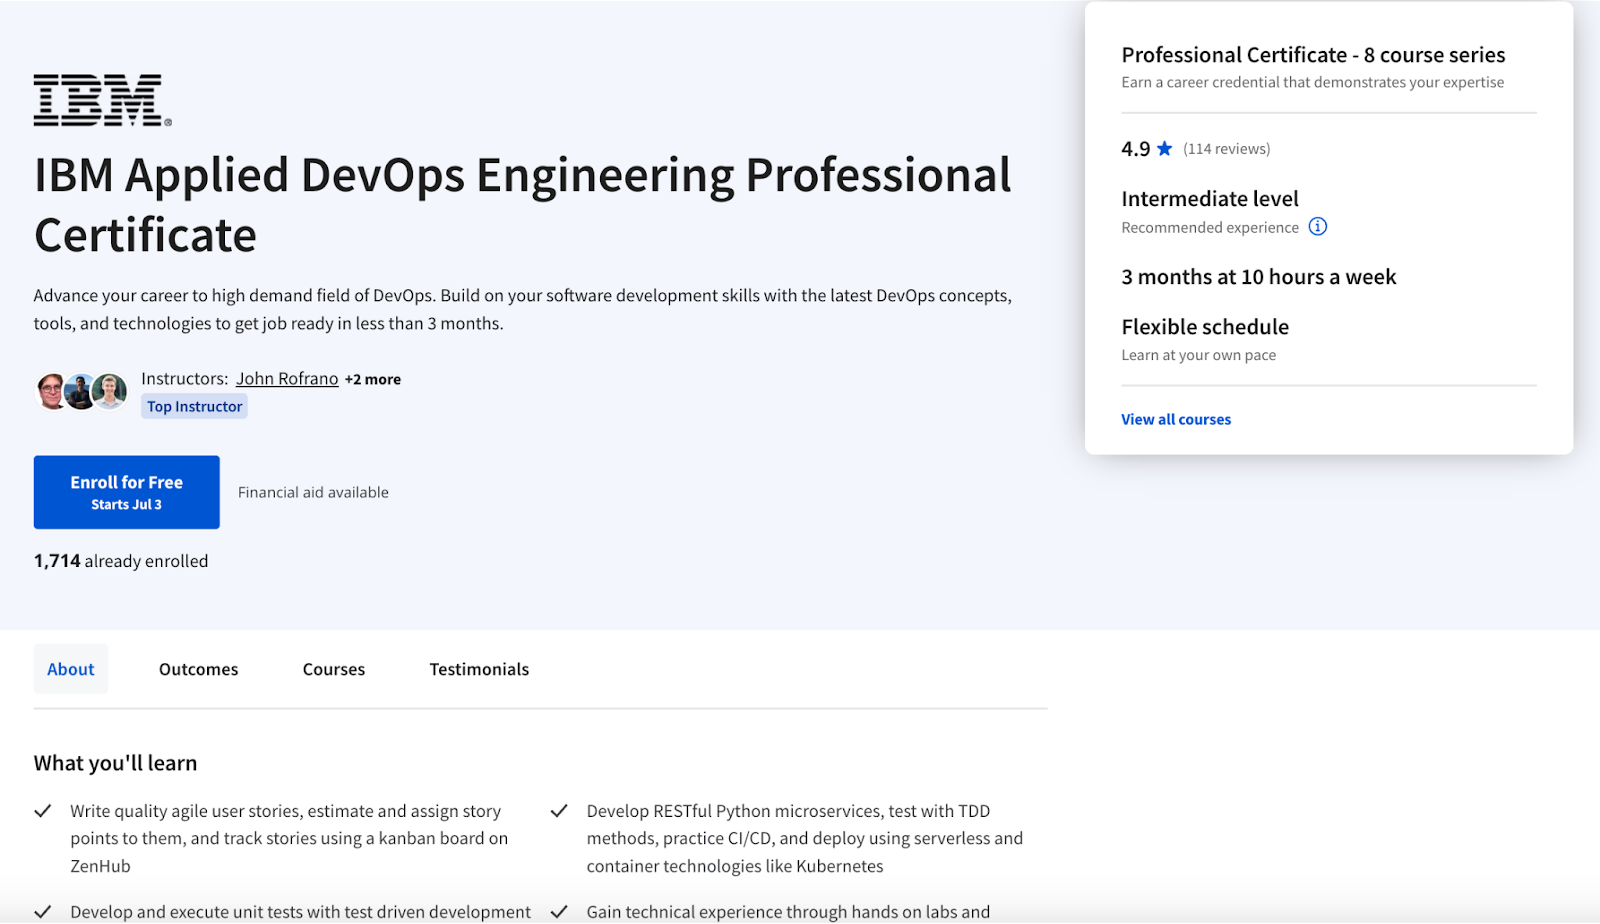 IBM Applied DevOps Engineering Professional Certificate course on Coursera